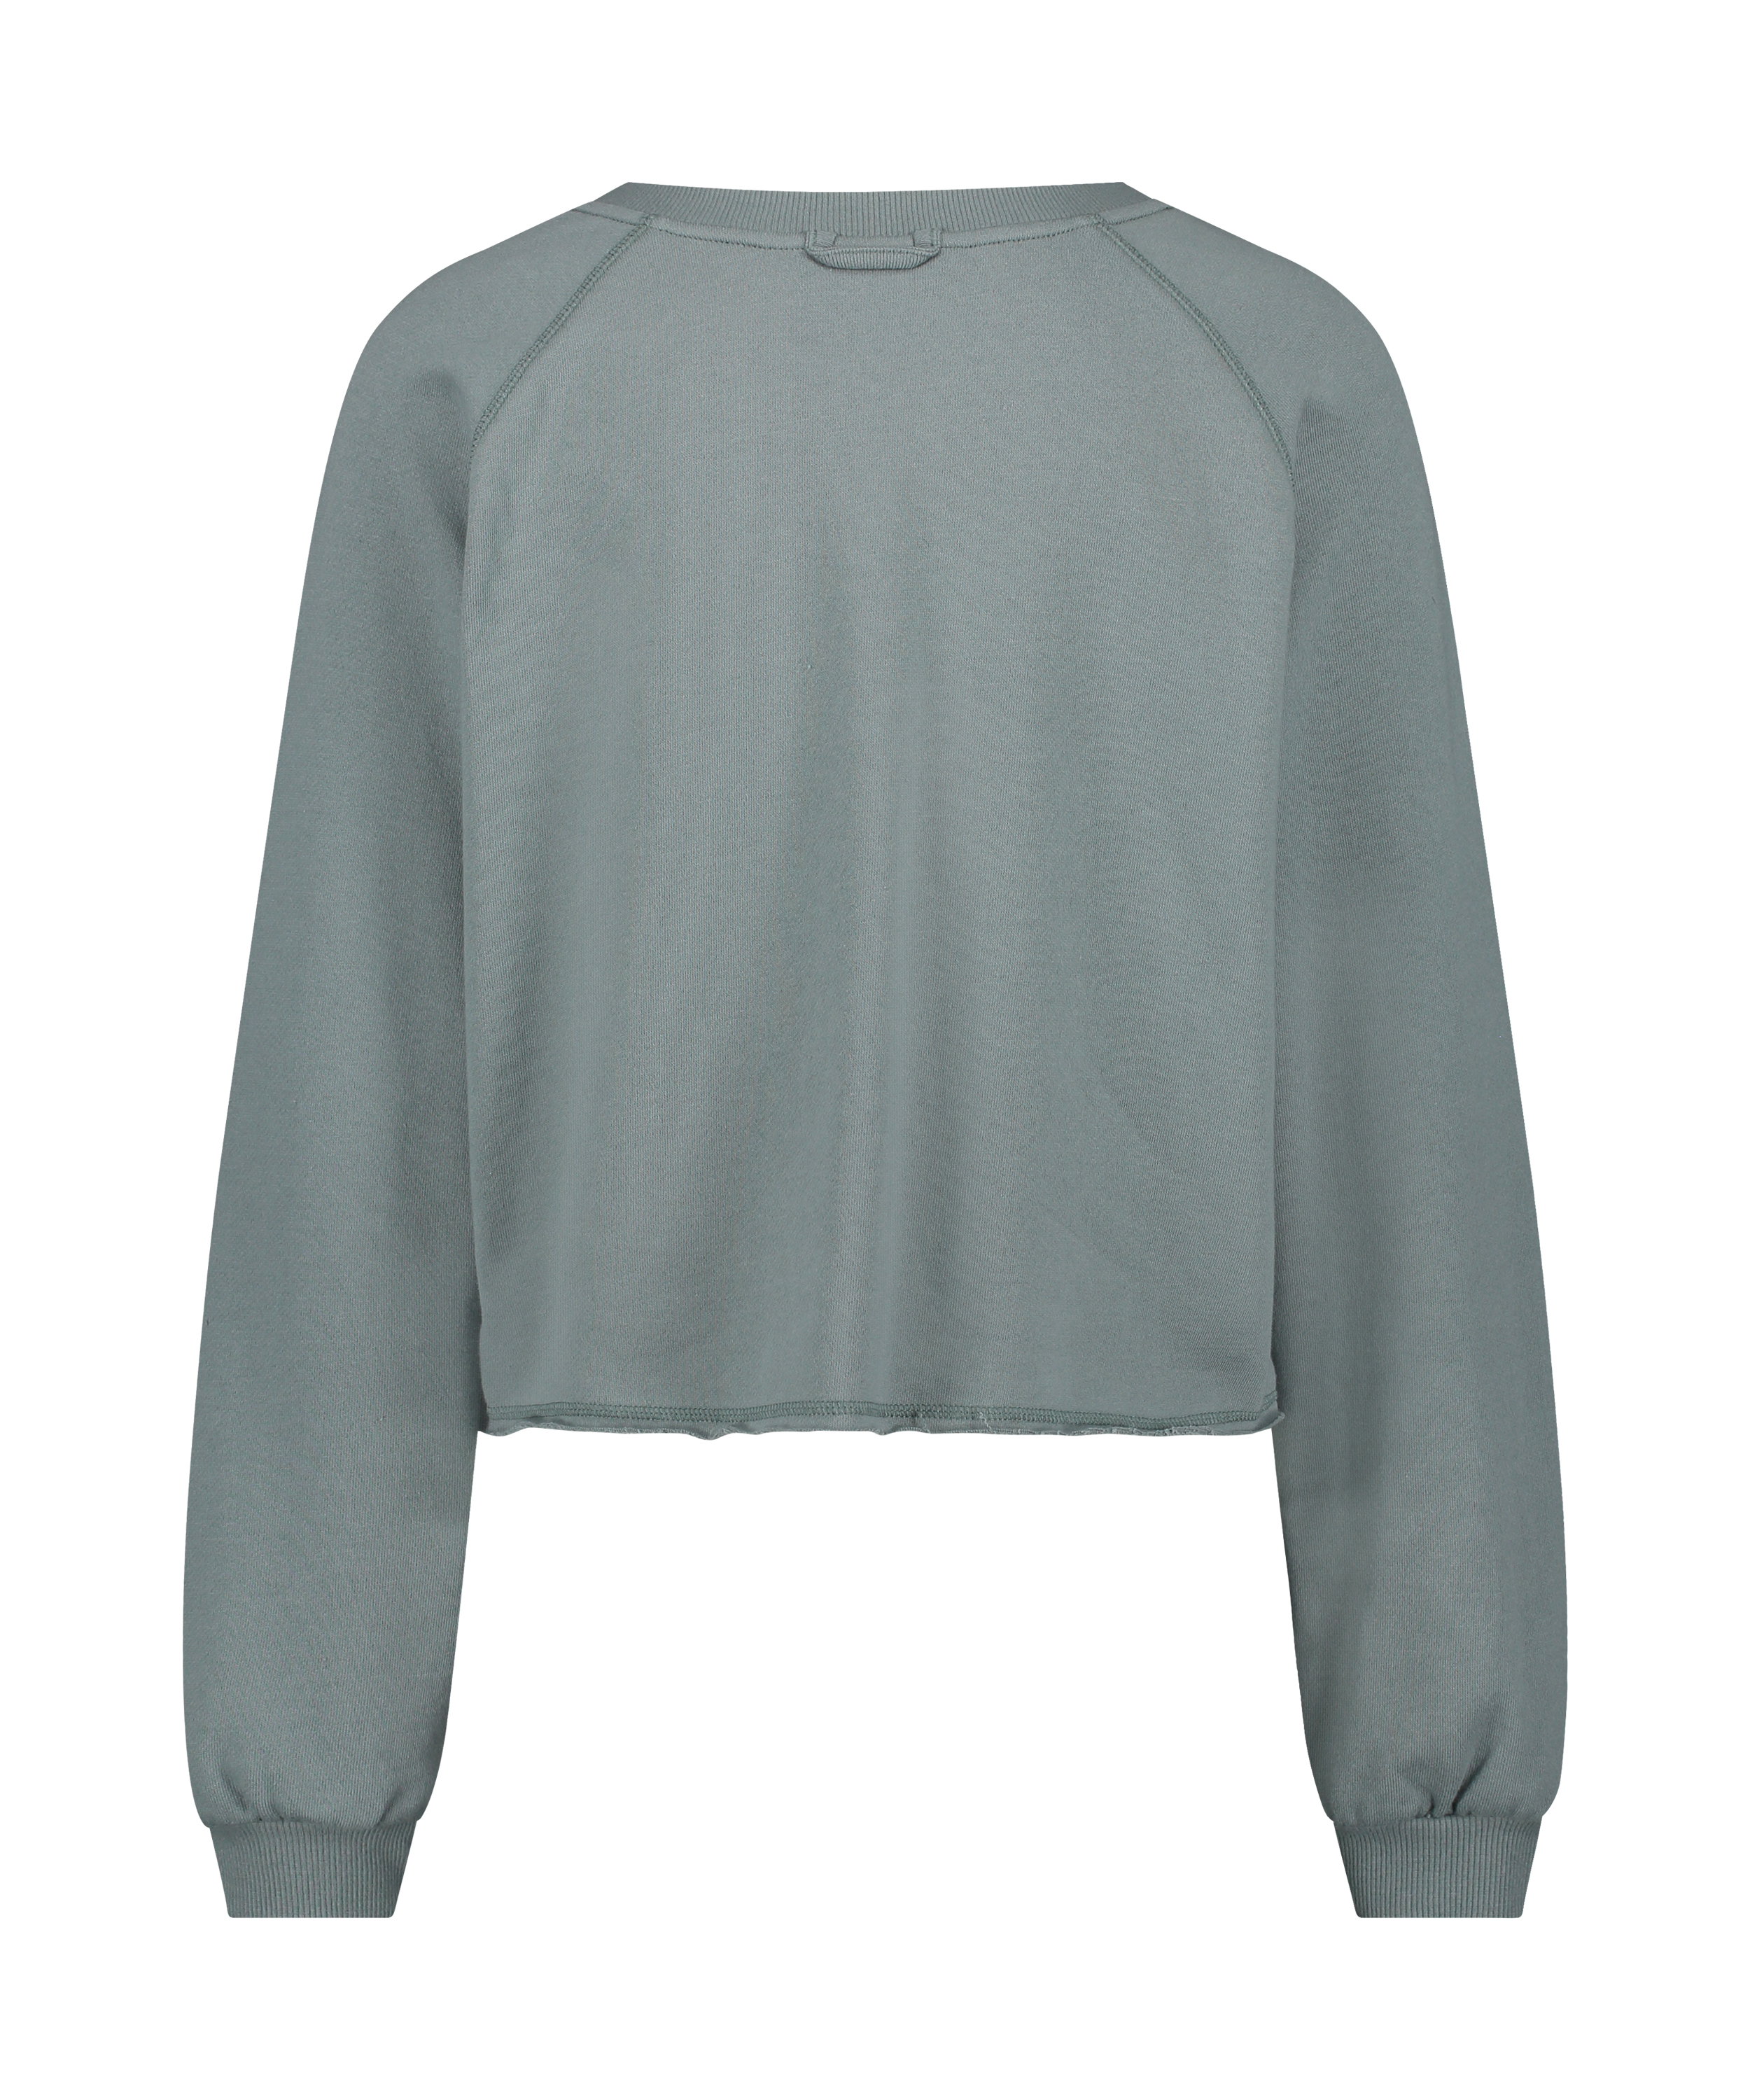 Sweat French Long-Sleeved Top, Green, main